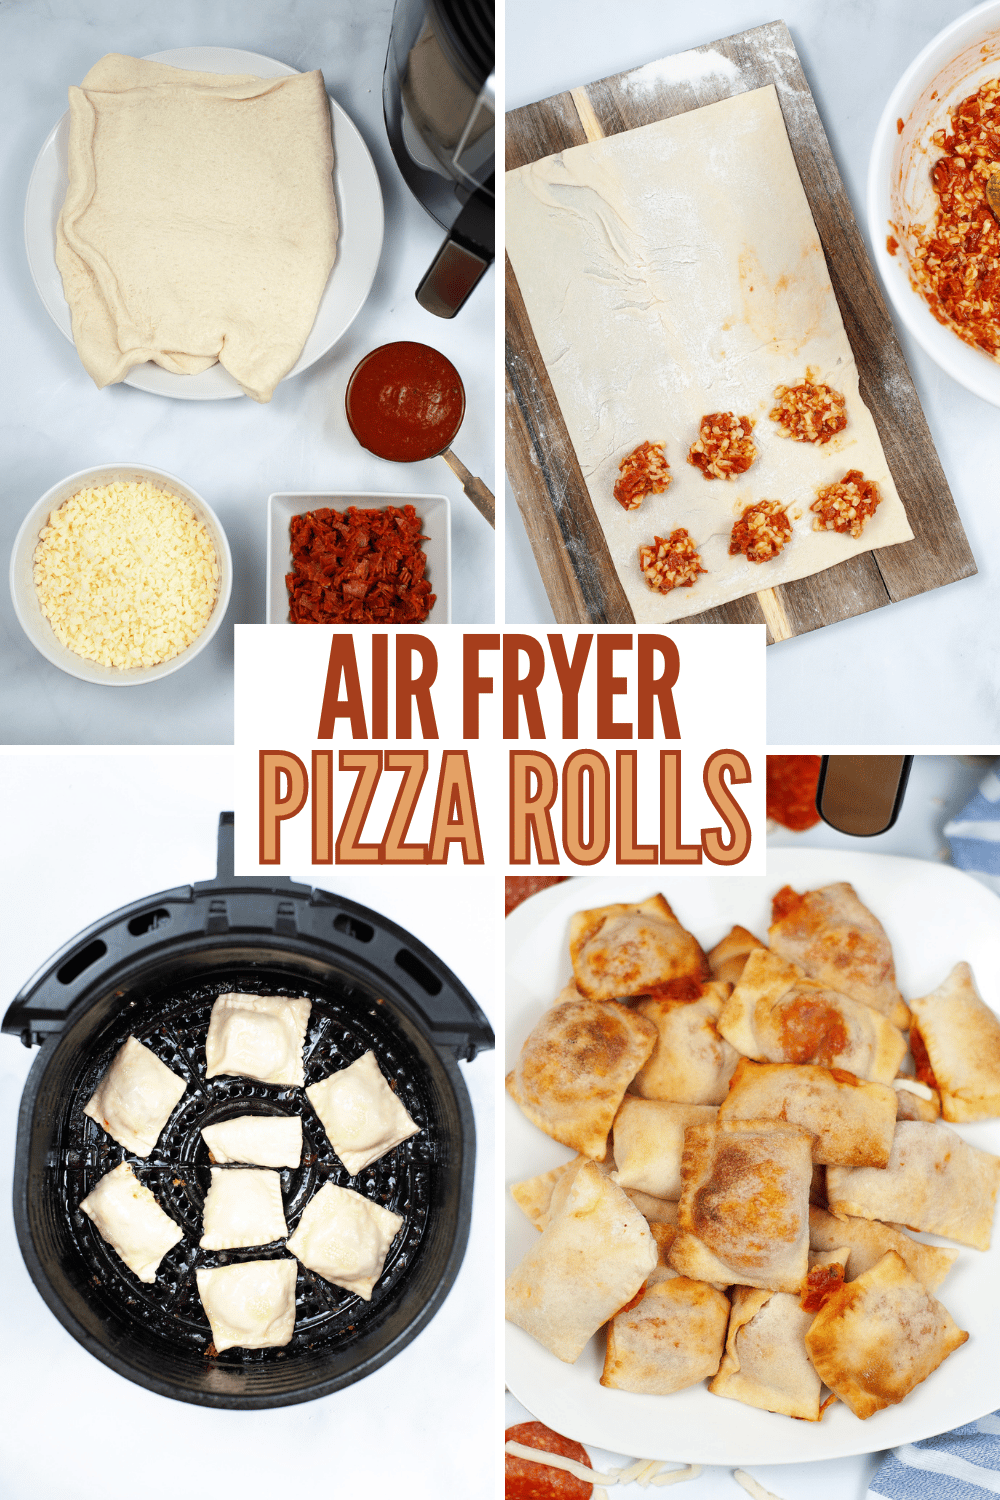 Air fryer pizza rolls are an easy and delicious way to enjoy pizza! These little bites are perfect for a party or as a quick and easy dinner. #airfryerpizzarolls #airfryer #pizzarolls #pizza via @wondermomwannab